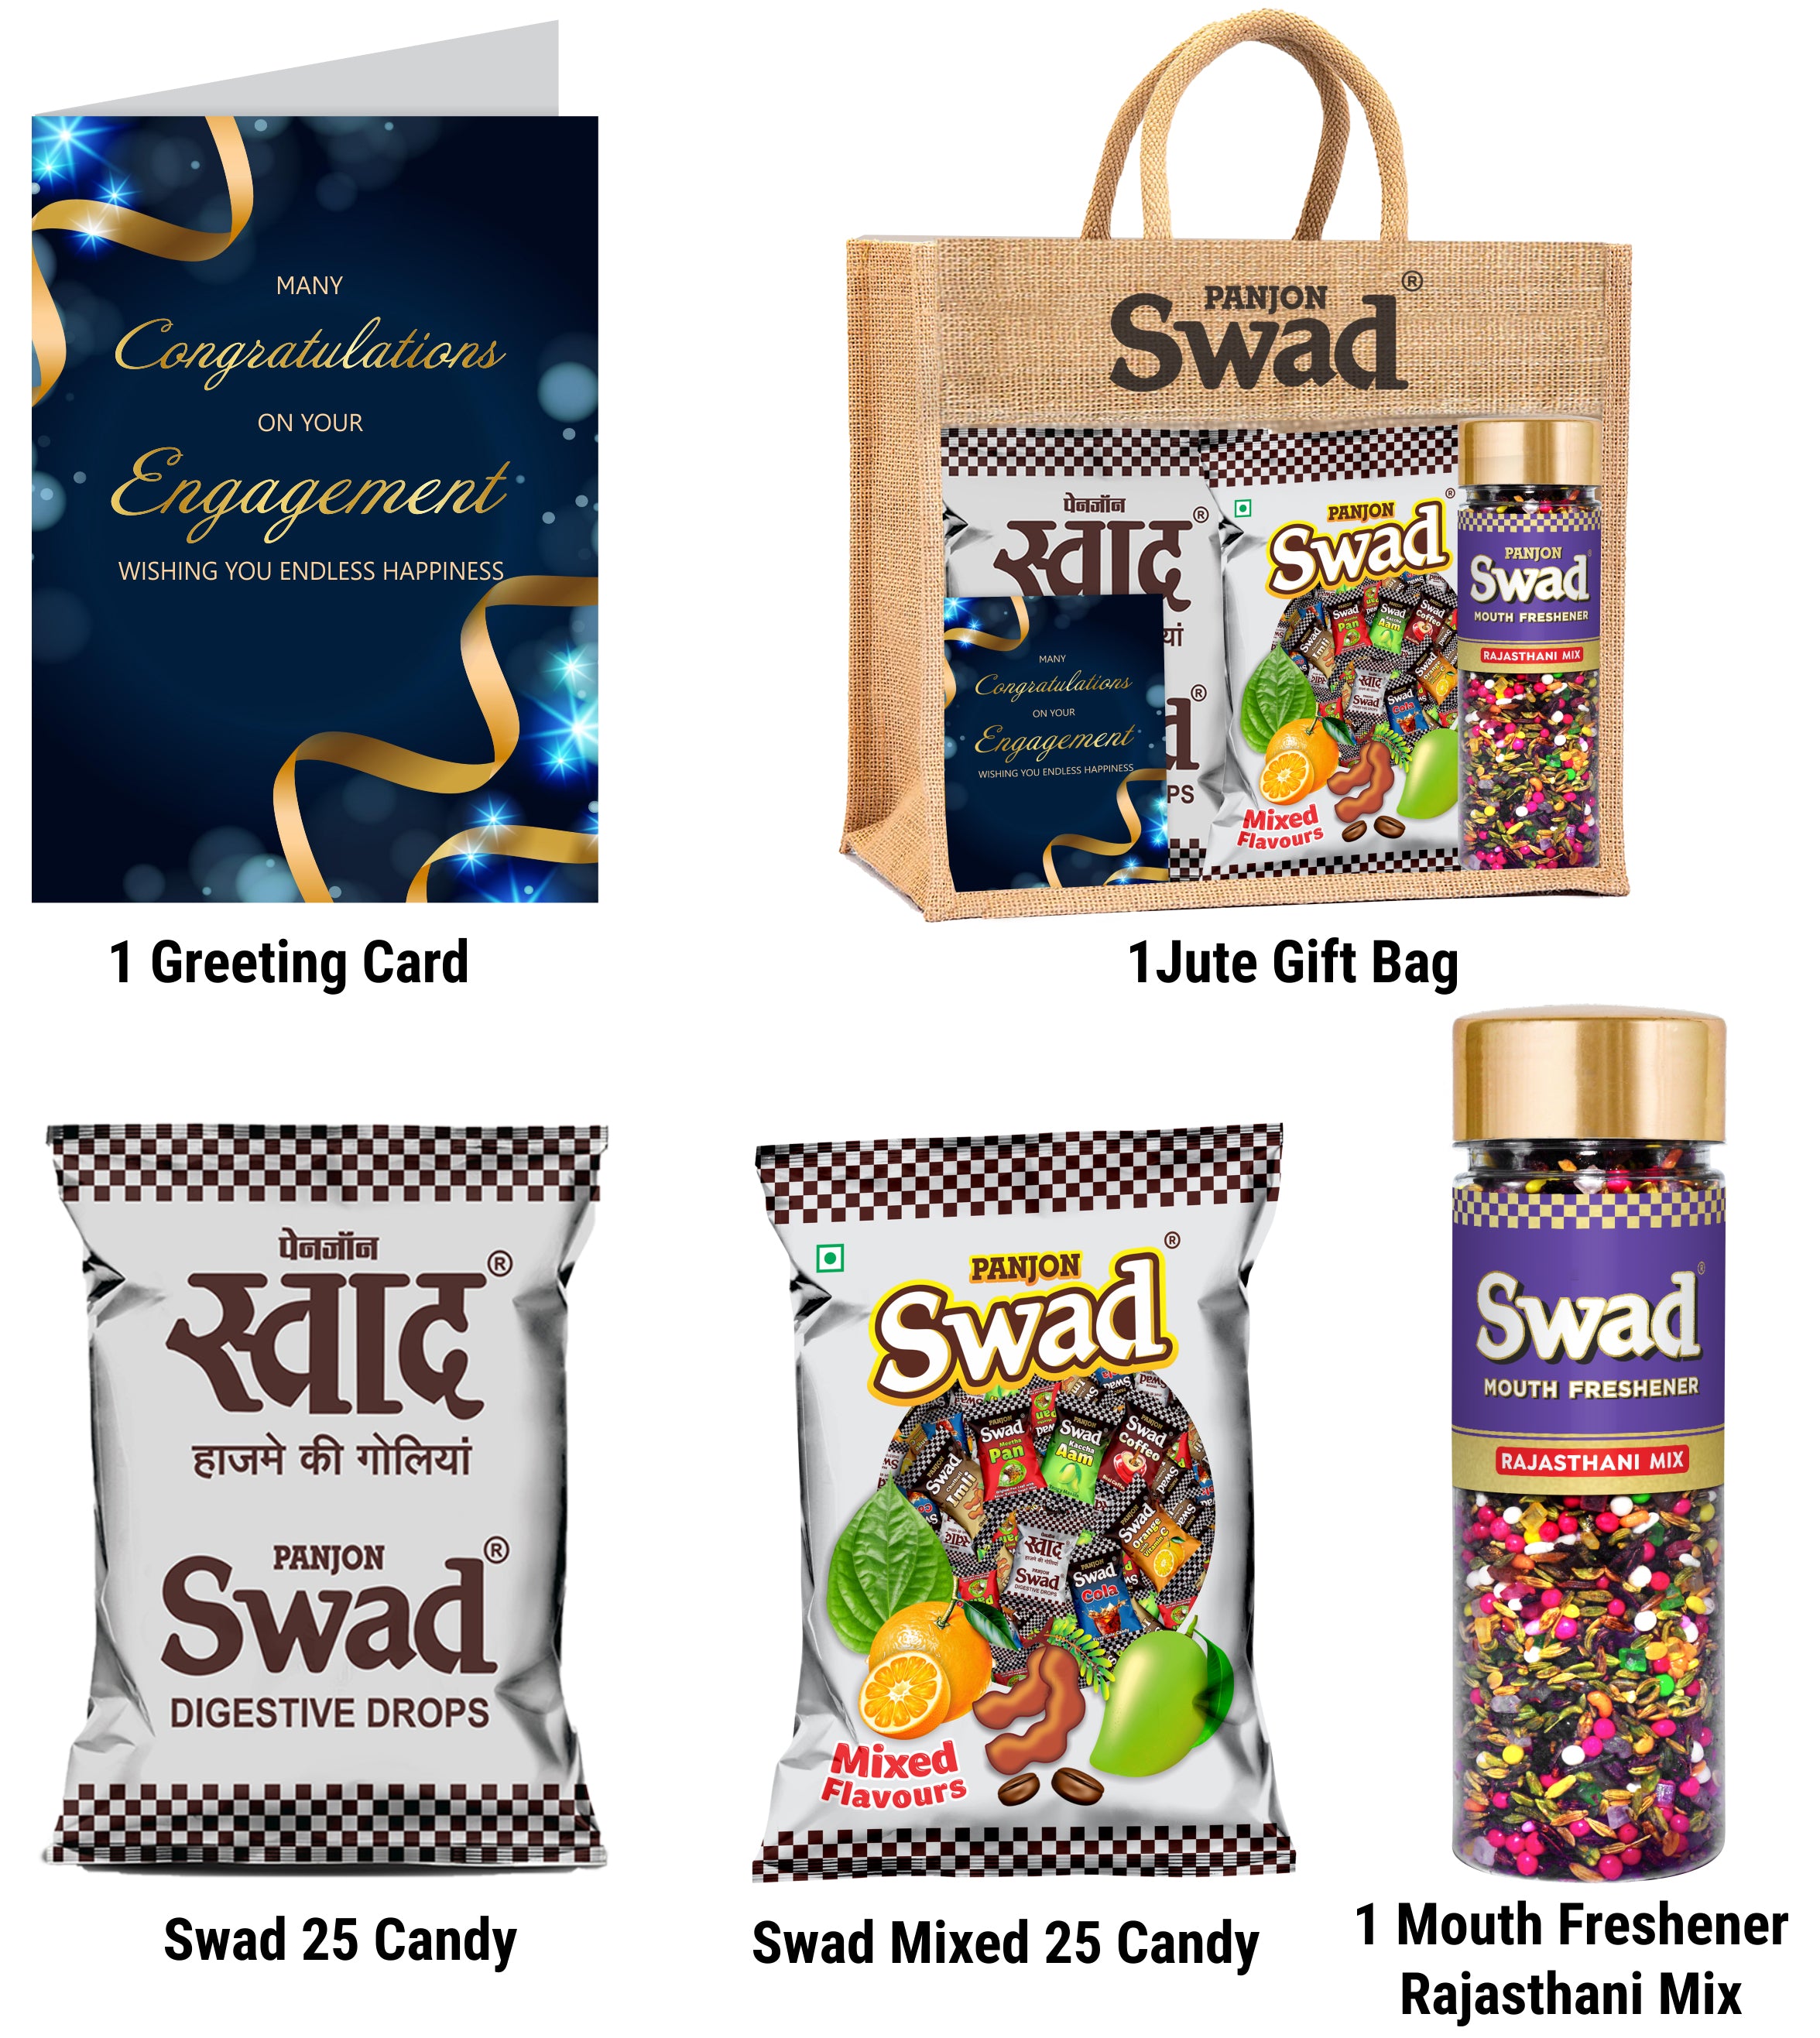 Swad Engagement Gift for Sagai Ring Ceremony with Card (25 Swad Candy, 25 Mixed Toffee, Rajasthani Mix Mukhwas) in Jute Bag